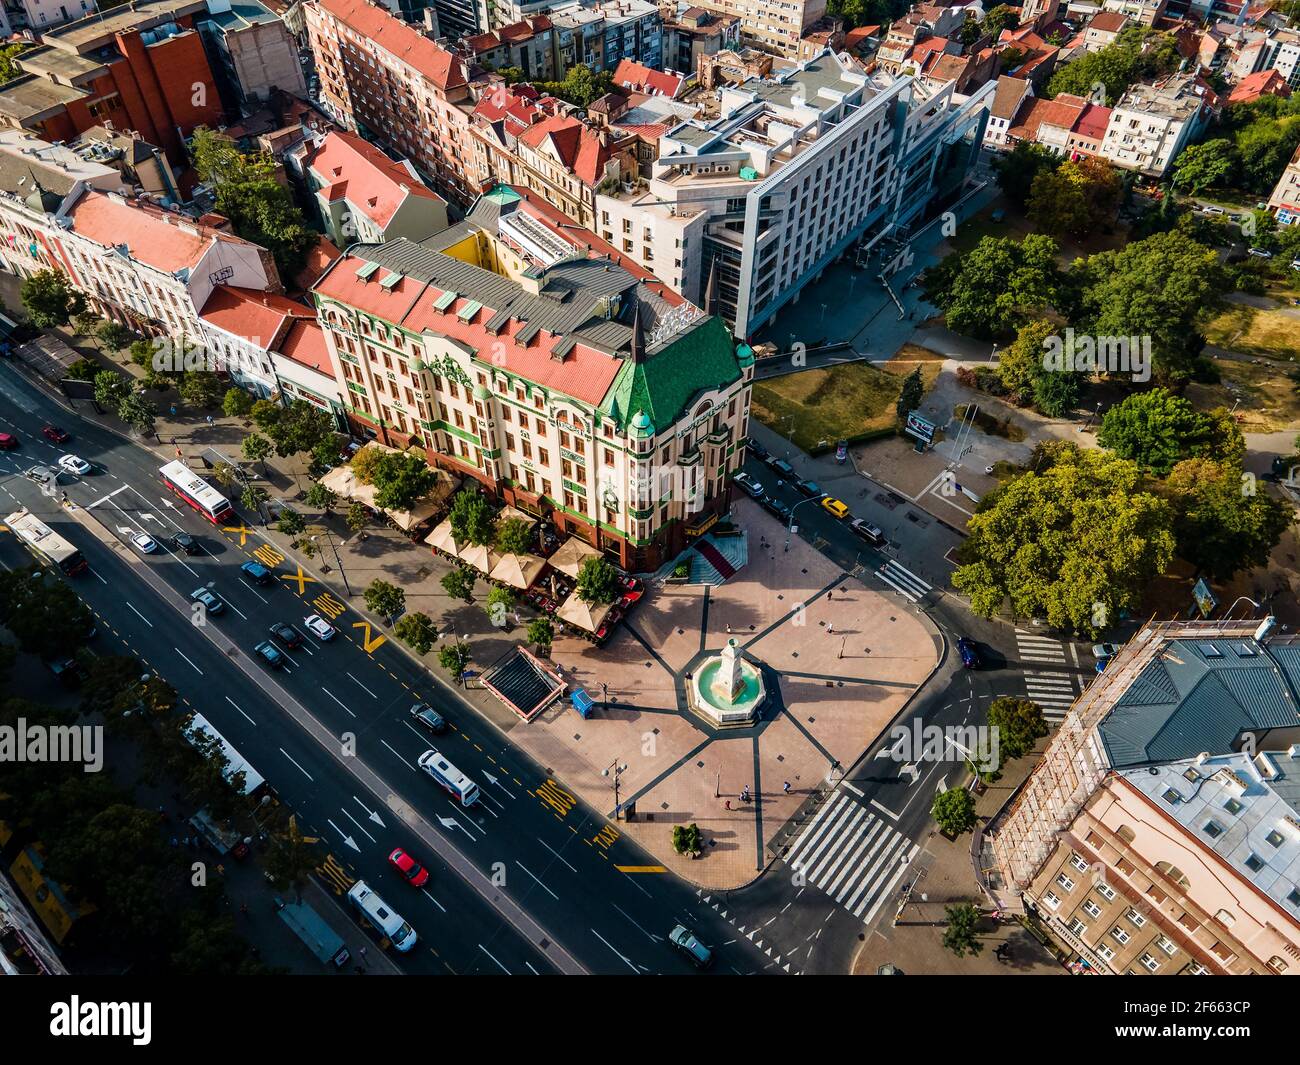 Belgrade, Serbia - September 25, 2020: Aerial view of the Terazije Square in Belgrade downtown of the Serbian capital city at sunrise Stock Photo